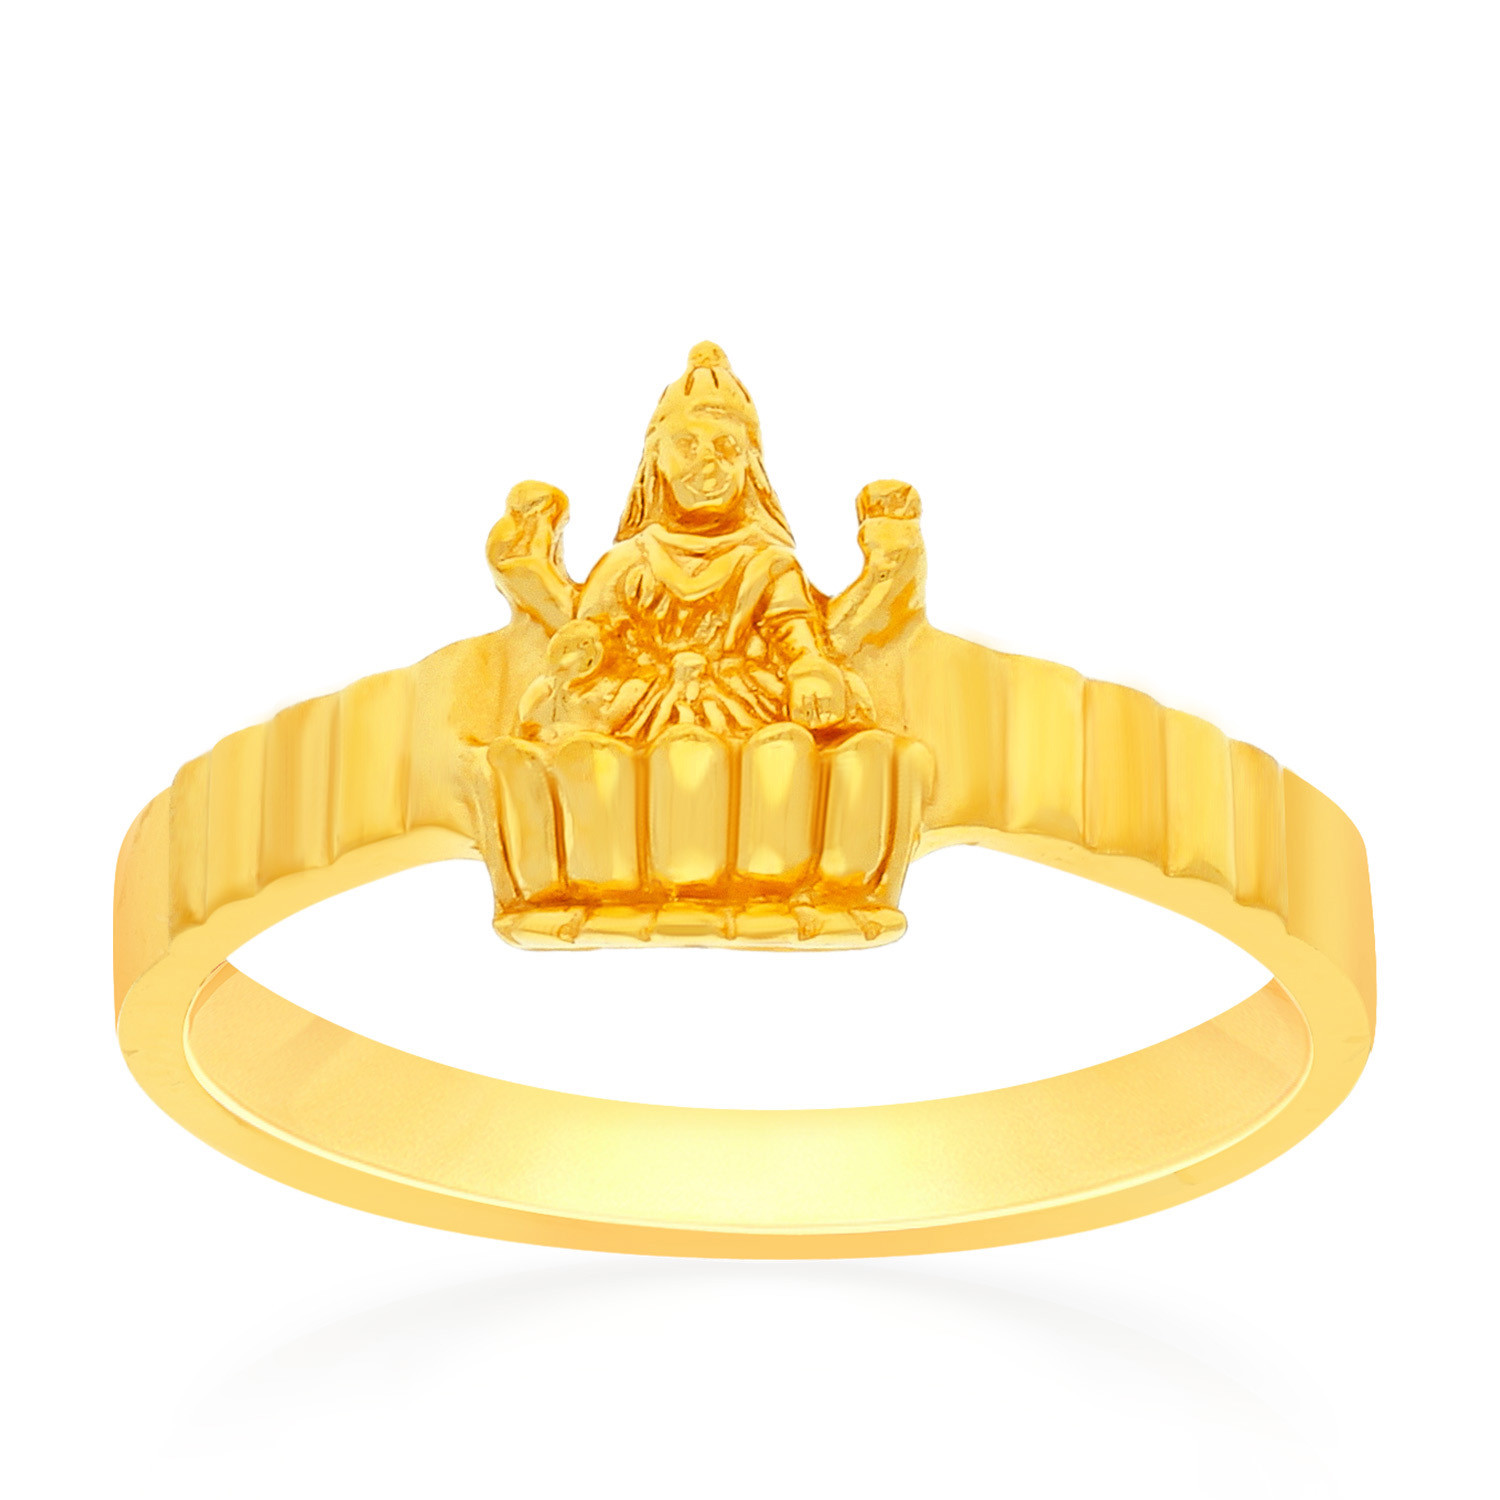 Pin by jaya on Rings | Gold ring designs, Gold finger rings, Gold jewelry  simple